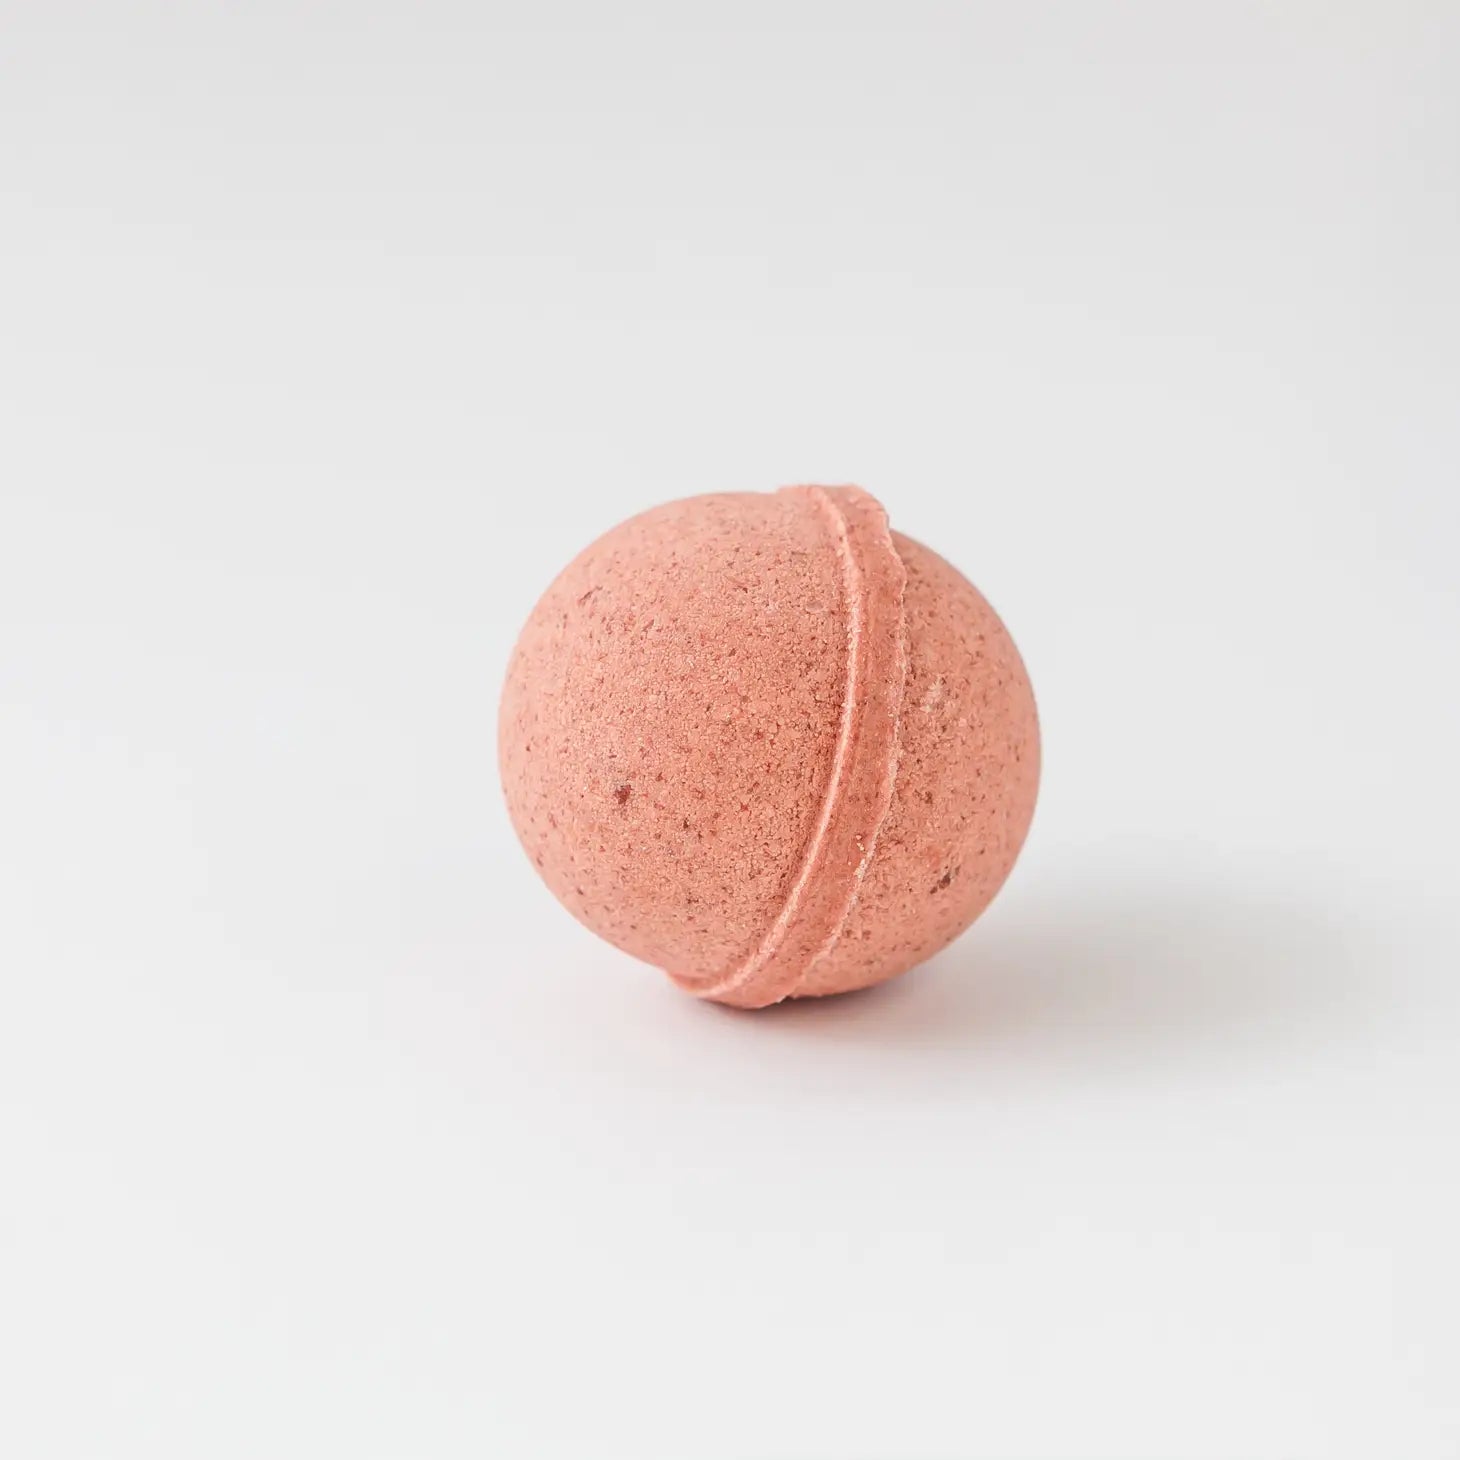 Old Whaling Co. | Bath Bomb: Seaberry &amp; Rose Clay